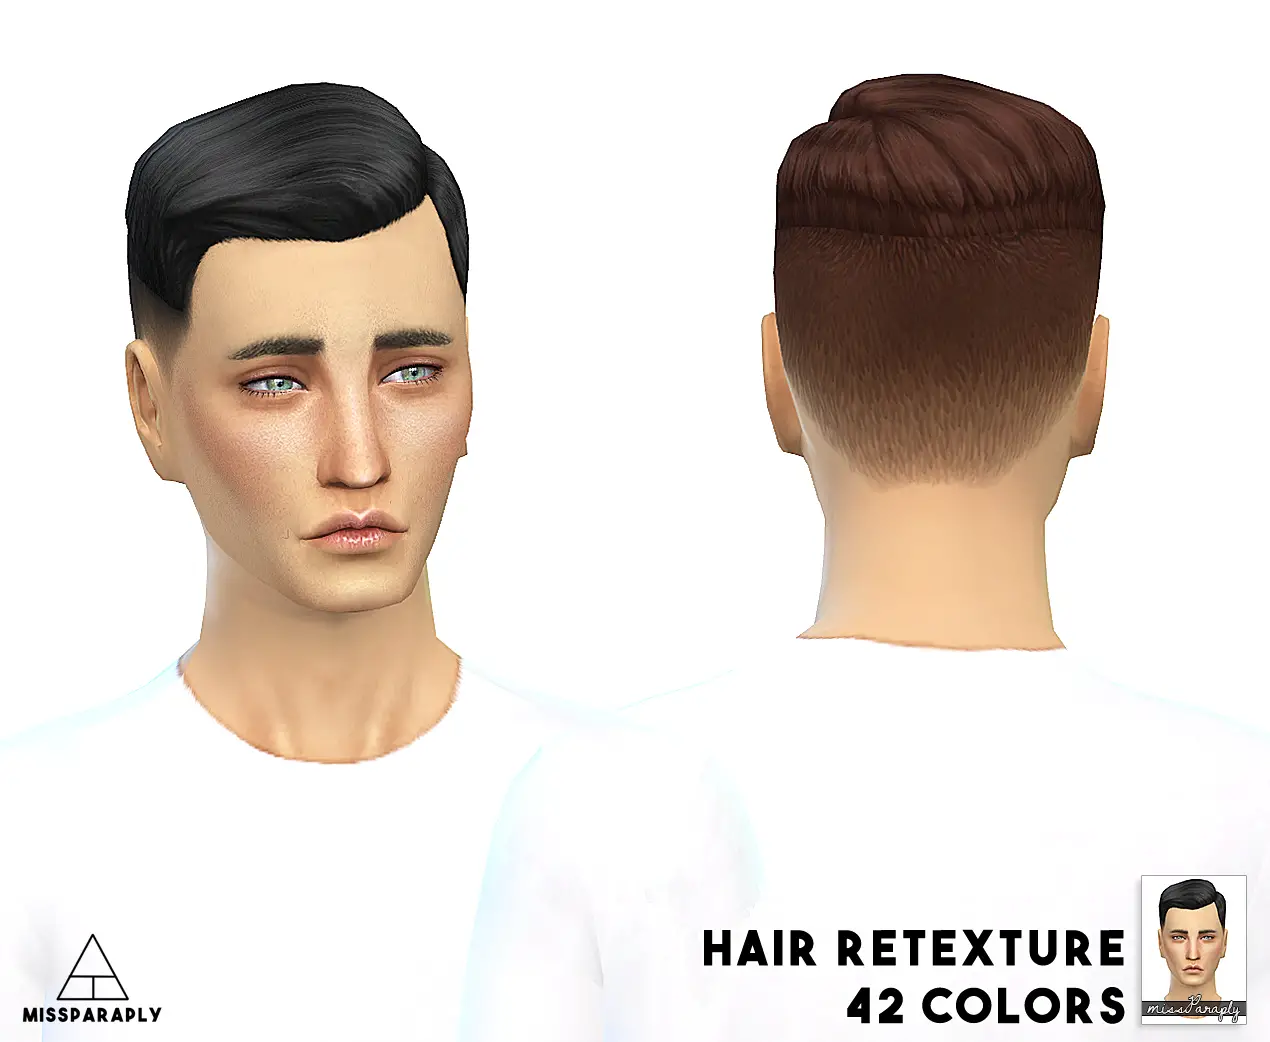 Sims 4 Hairs Miss Paraply Short Crew Cut Side Part Hairstyle Retextured